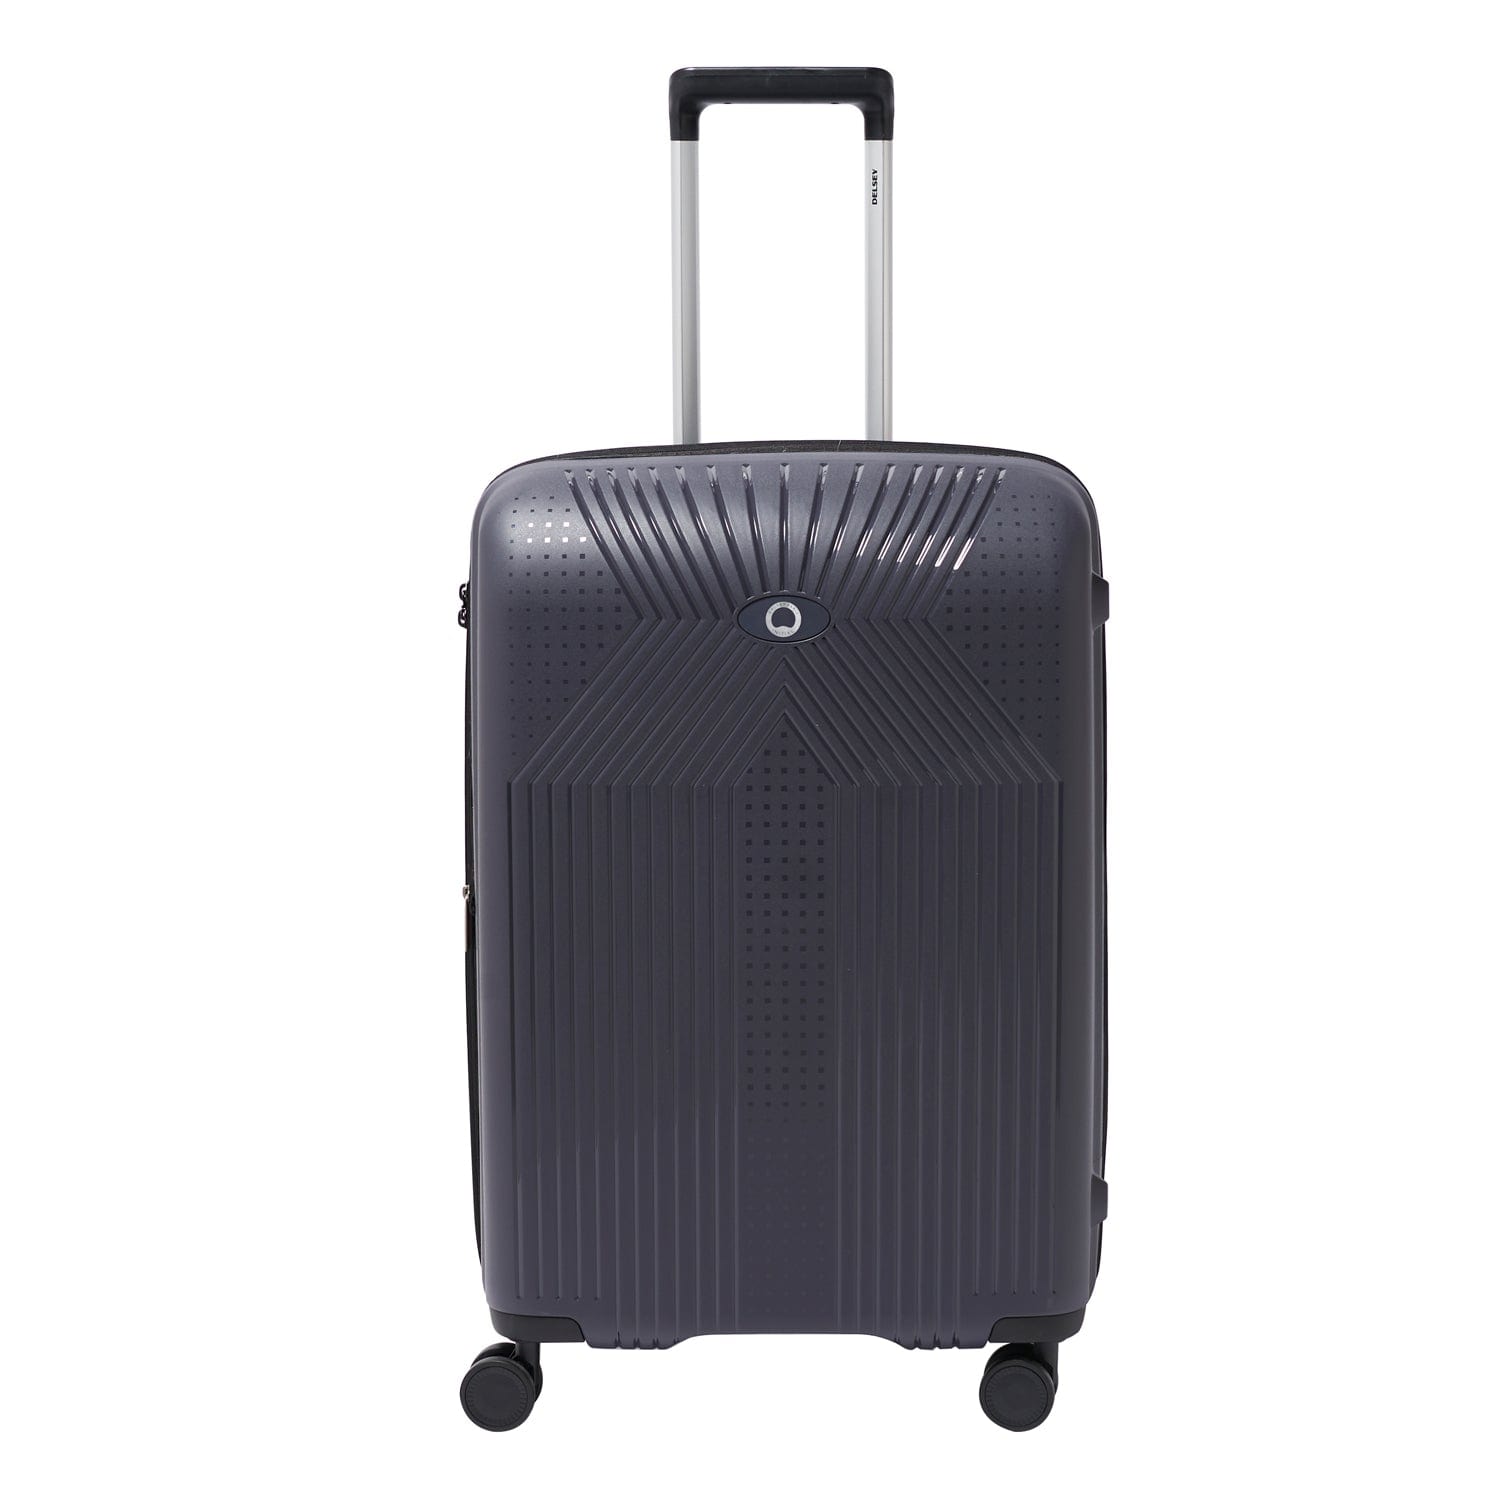 Delsey Ordener 2.0 66cm Hardcase 4 Double Wheel Expandable Check-In Luggage Trolley Anthracite - 00384681001E9